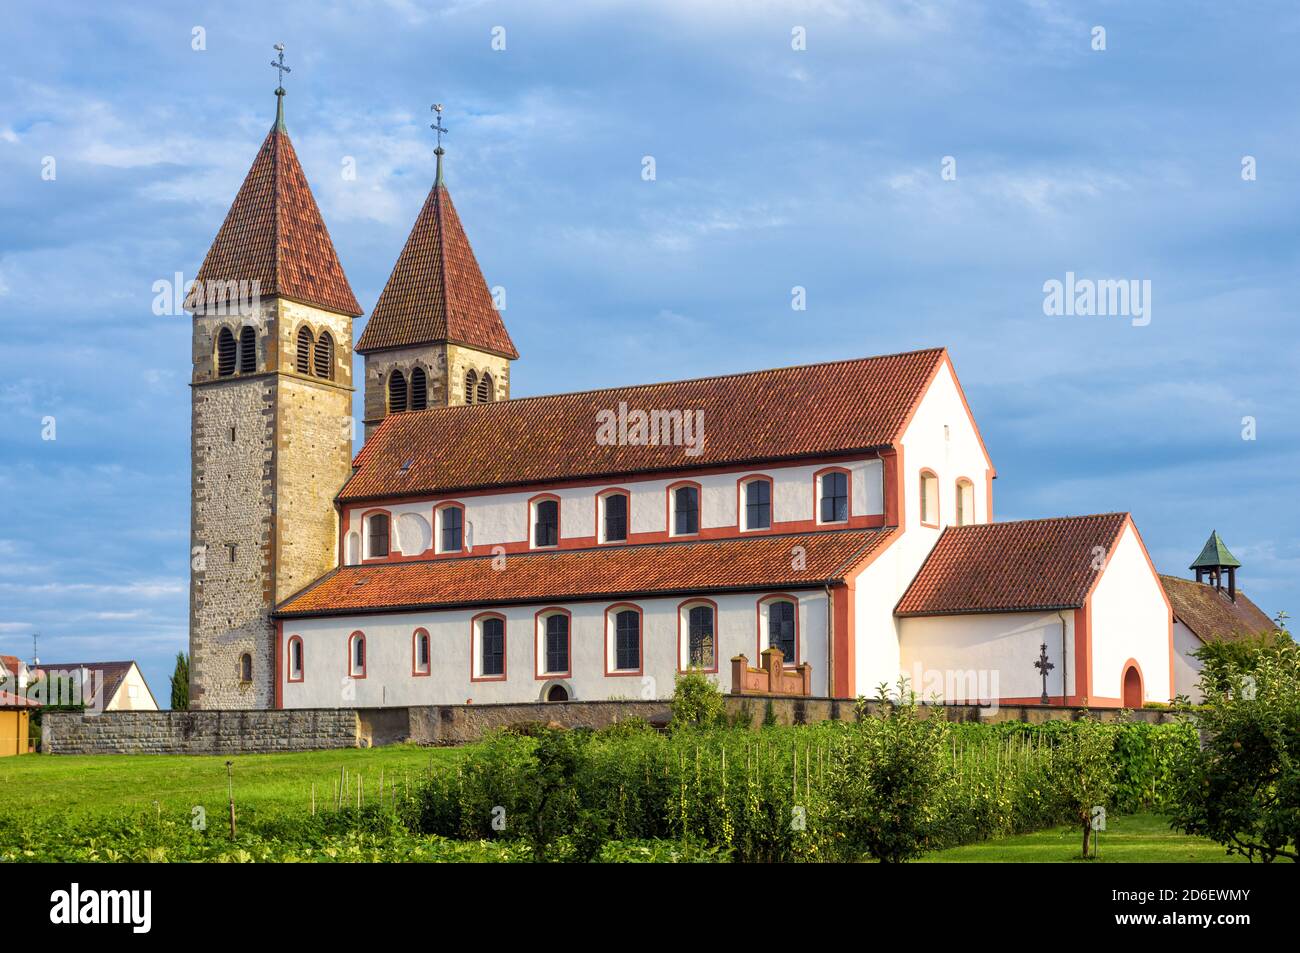 Church of St Peter and Paul in Reichenau Island, Germany. It is famous landmark of Baden-Wurttemberg. Medieval Christian building, Romanesque architec Stock Photo